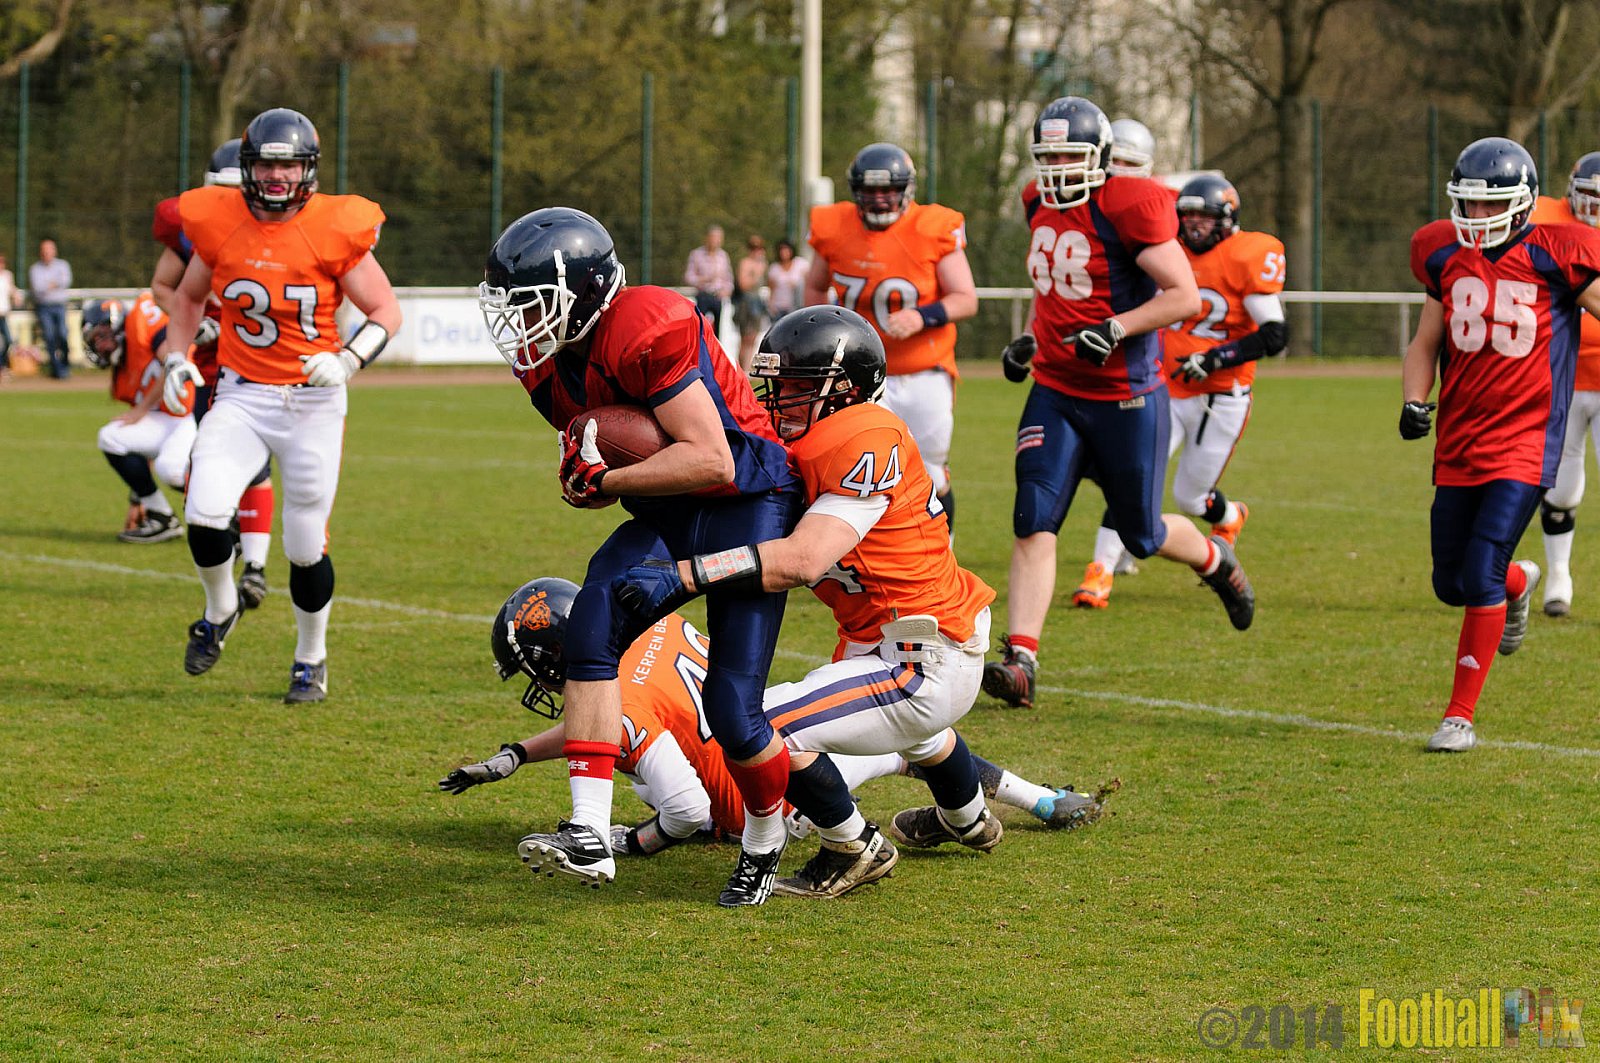 Wupperbowl 2014 - 30.03.2014 Off-Season Game: "Wupper Bowl 2014" 